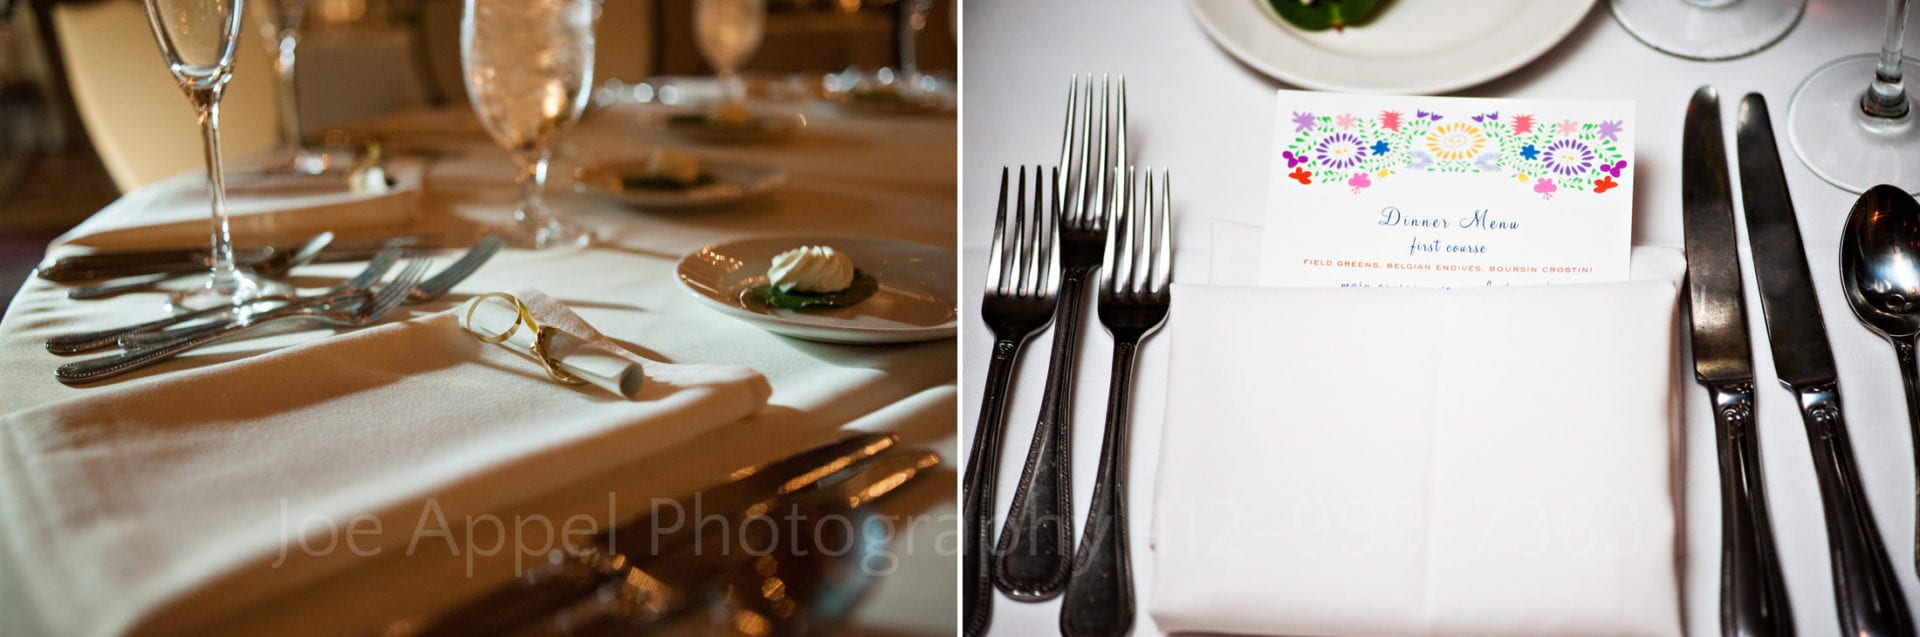 silverware and colorful floral place cards